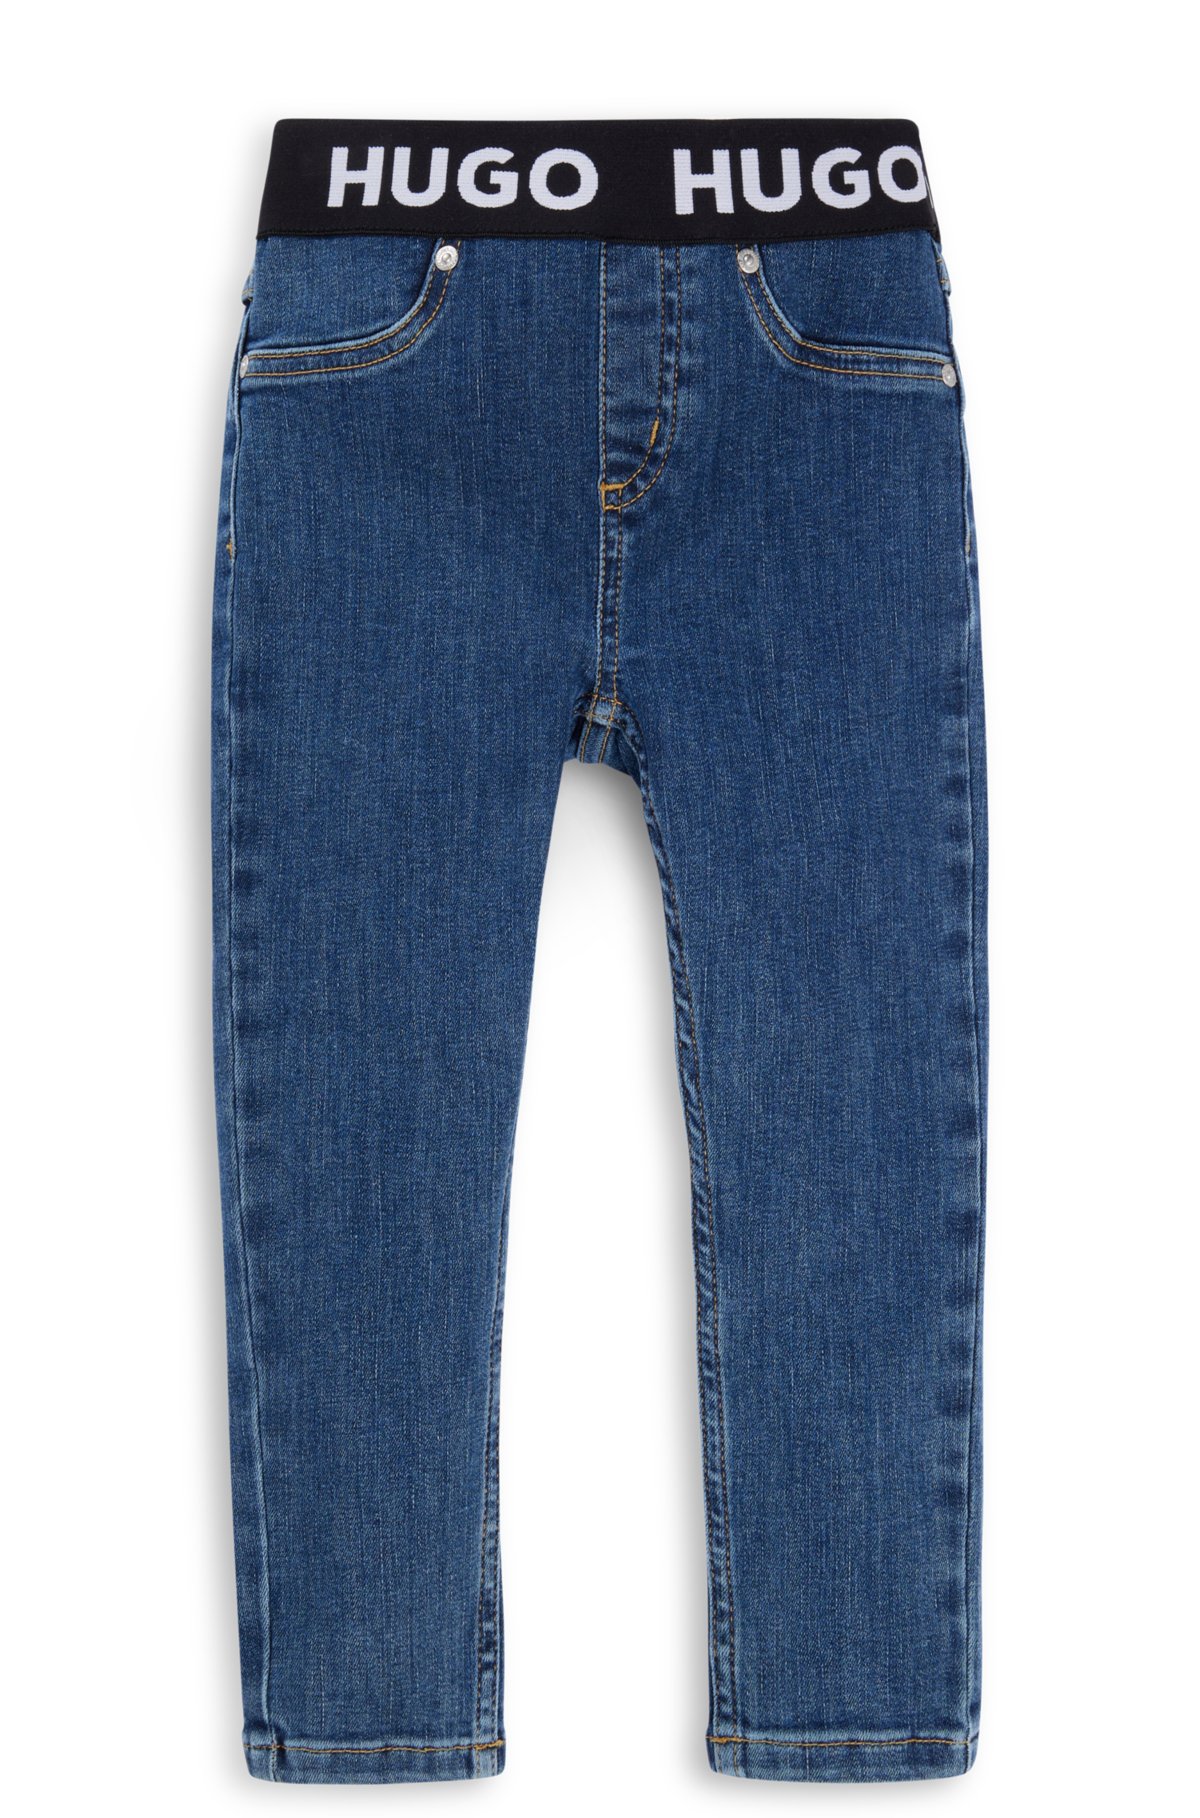 Kids' jeggings in blue stretch denim with branded waistband